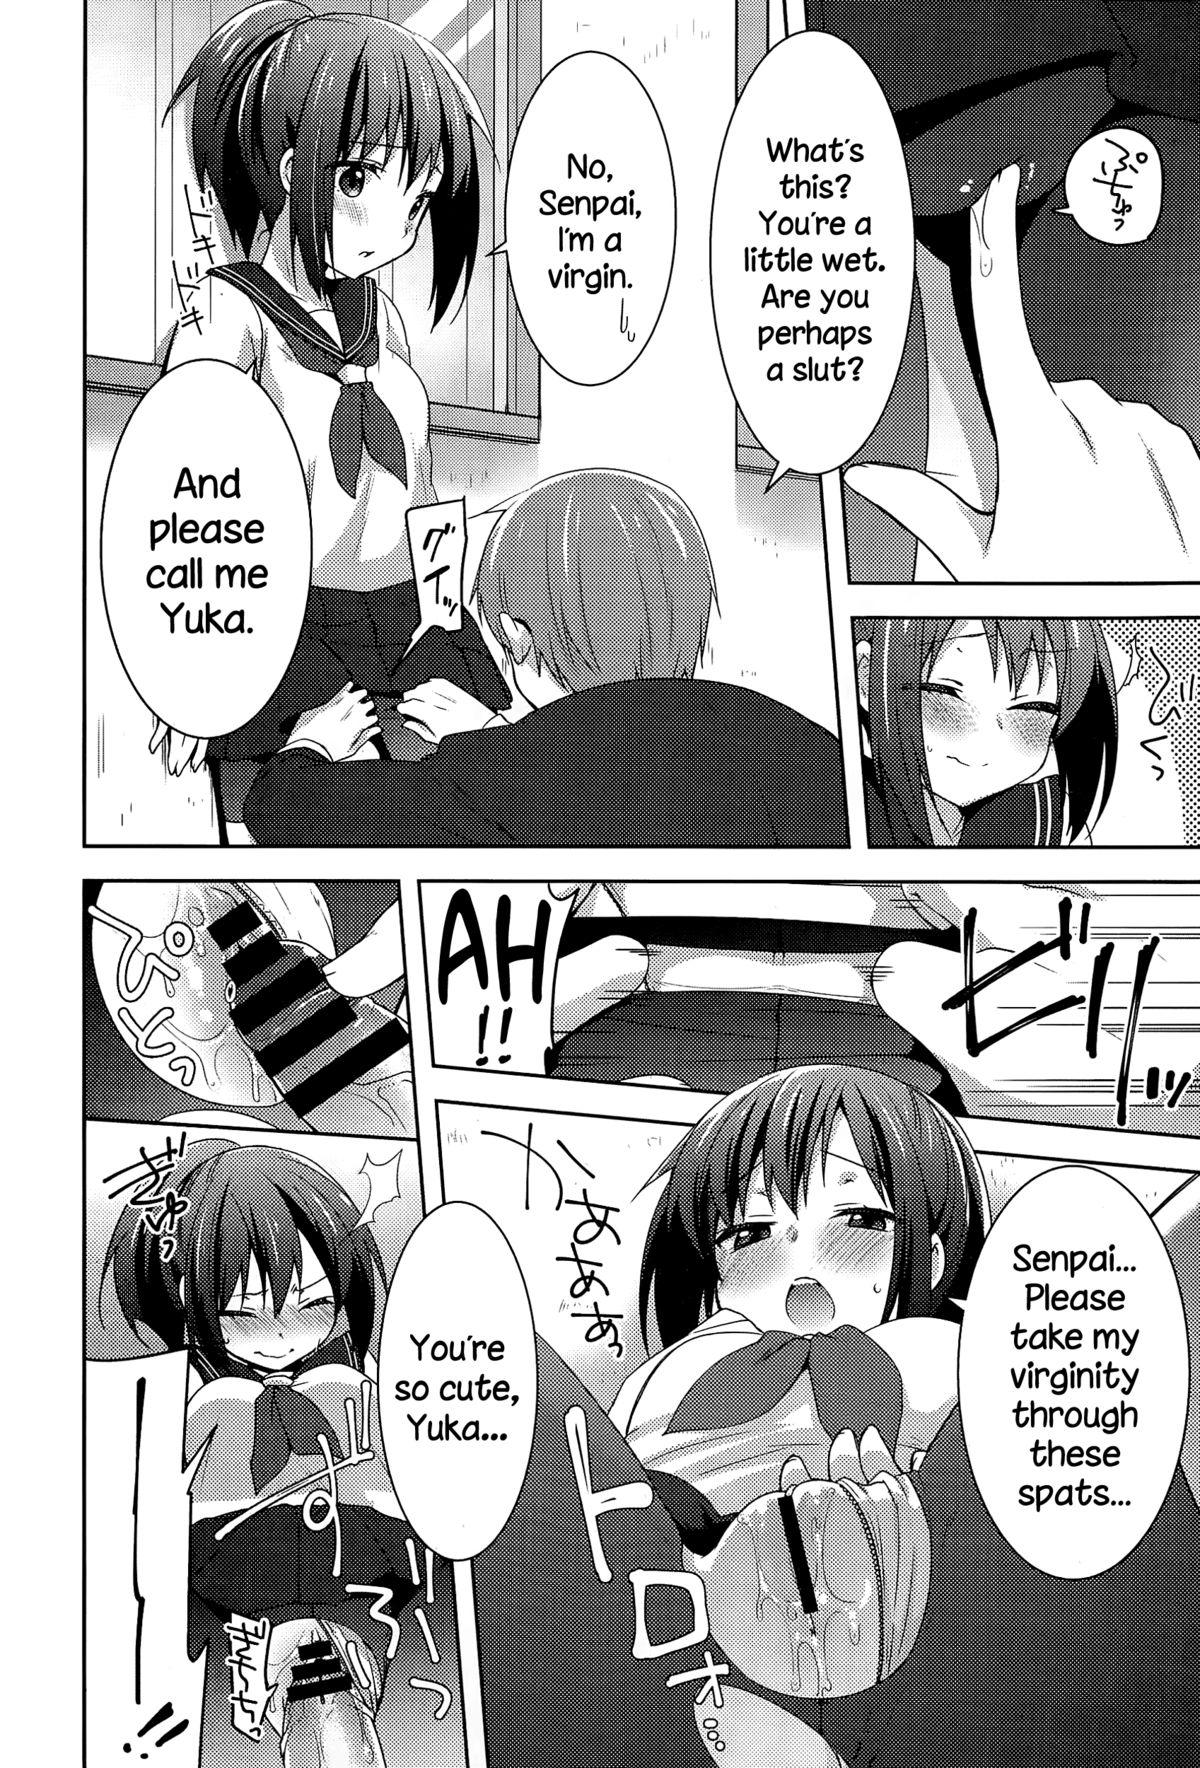 Friends Houkago Spats Club - Page 10